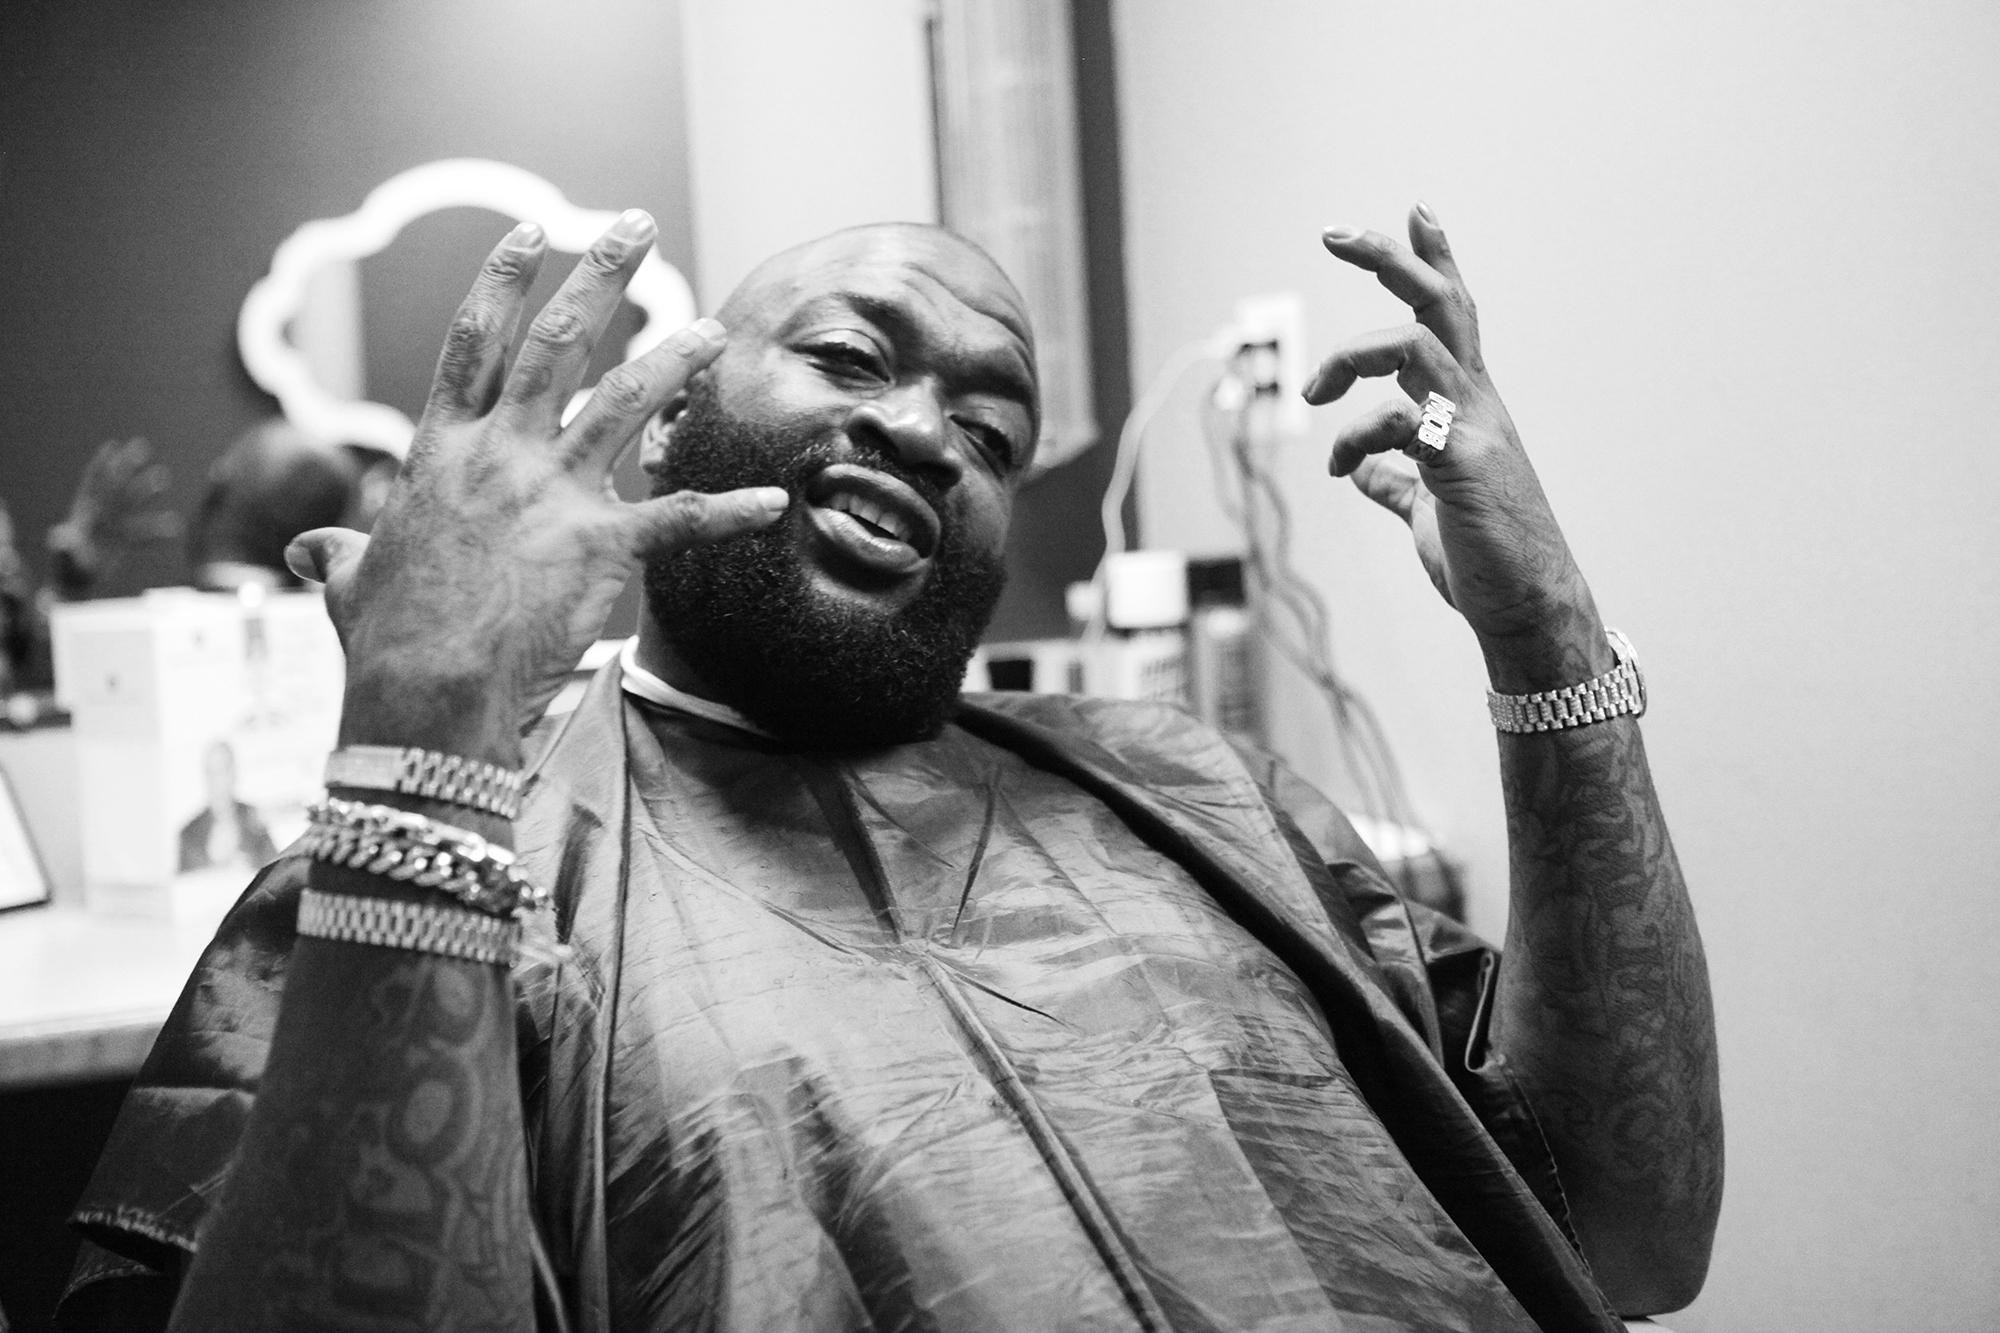 Rick Ross backstage at The Nightly Show with Larry Wilmore on Nov. 12, 2015 in New York City.